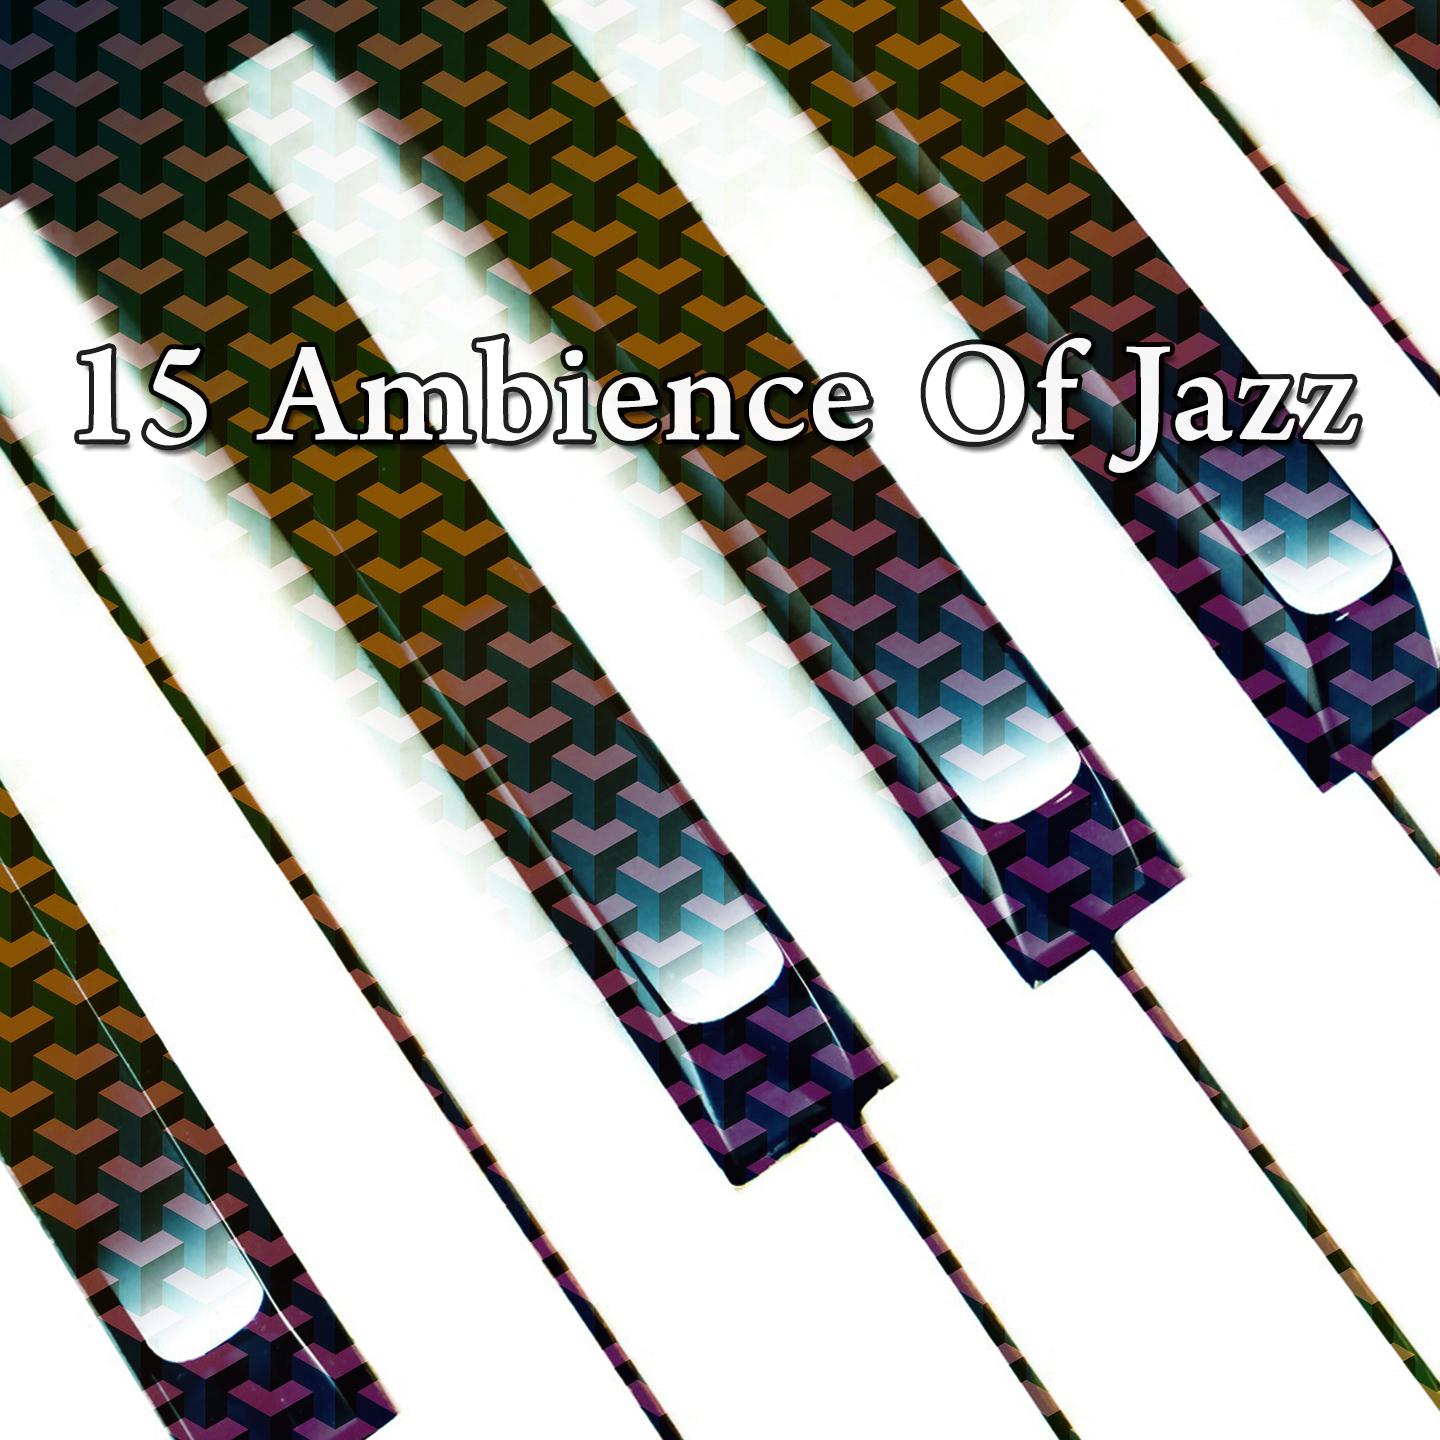 15 Ambience of Jazz